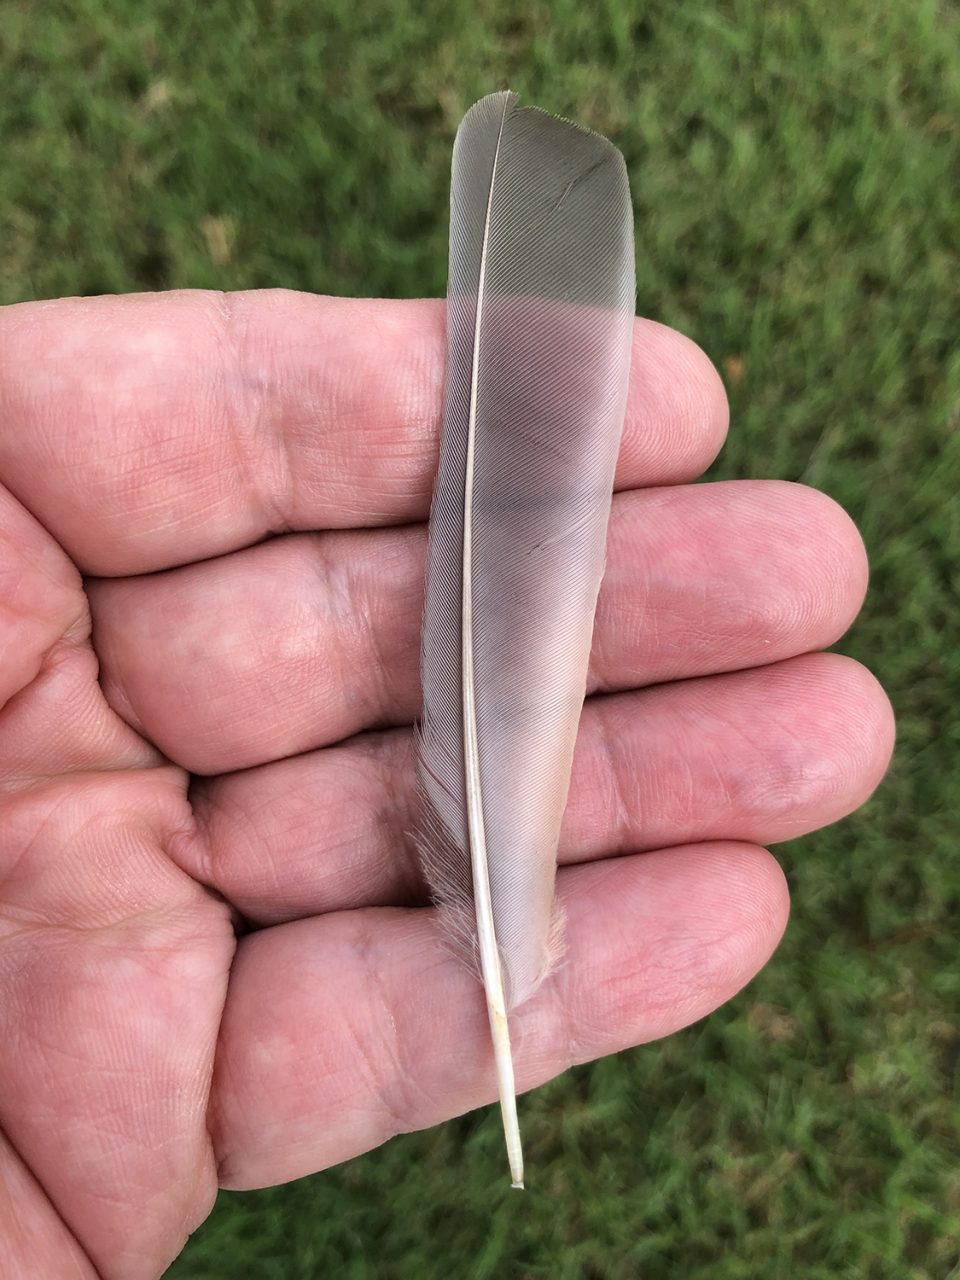 An appreciation of nature's perfect balance of beautiful design and efficiency -- a small translucent feather